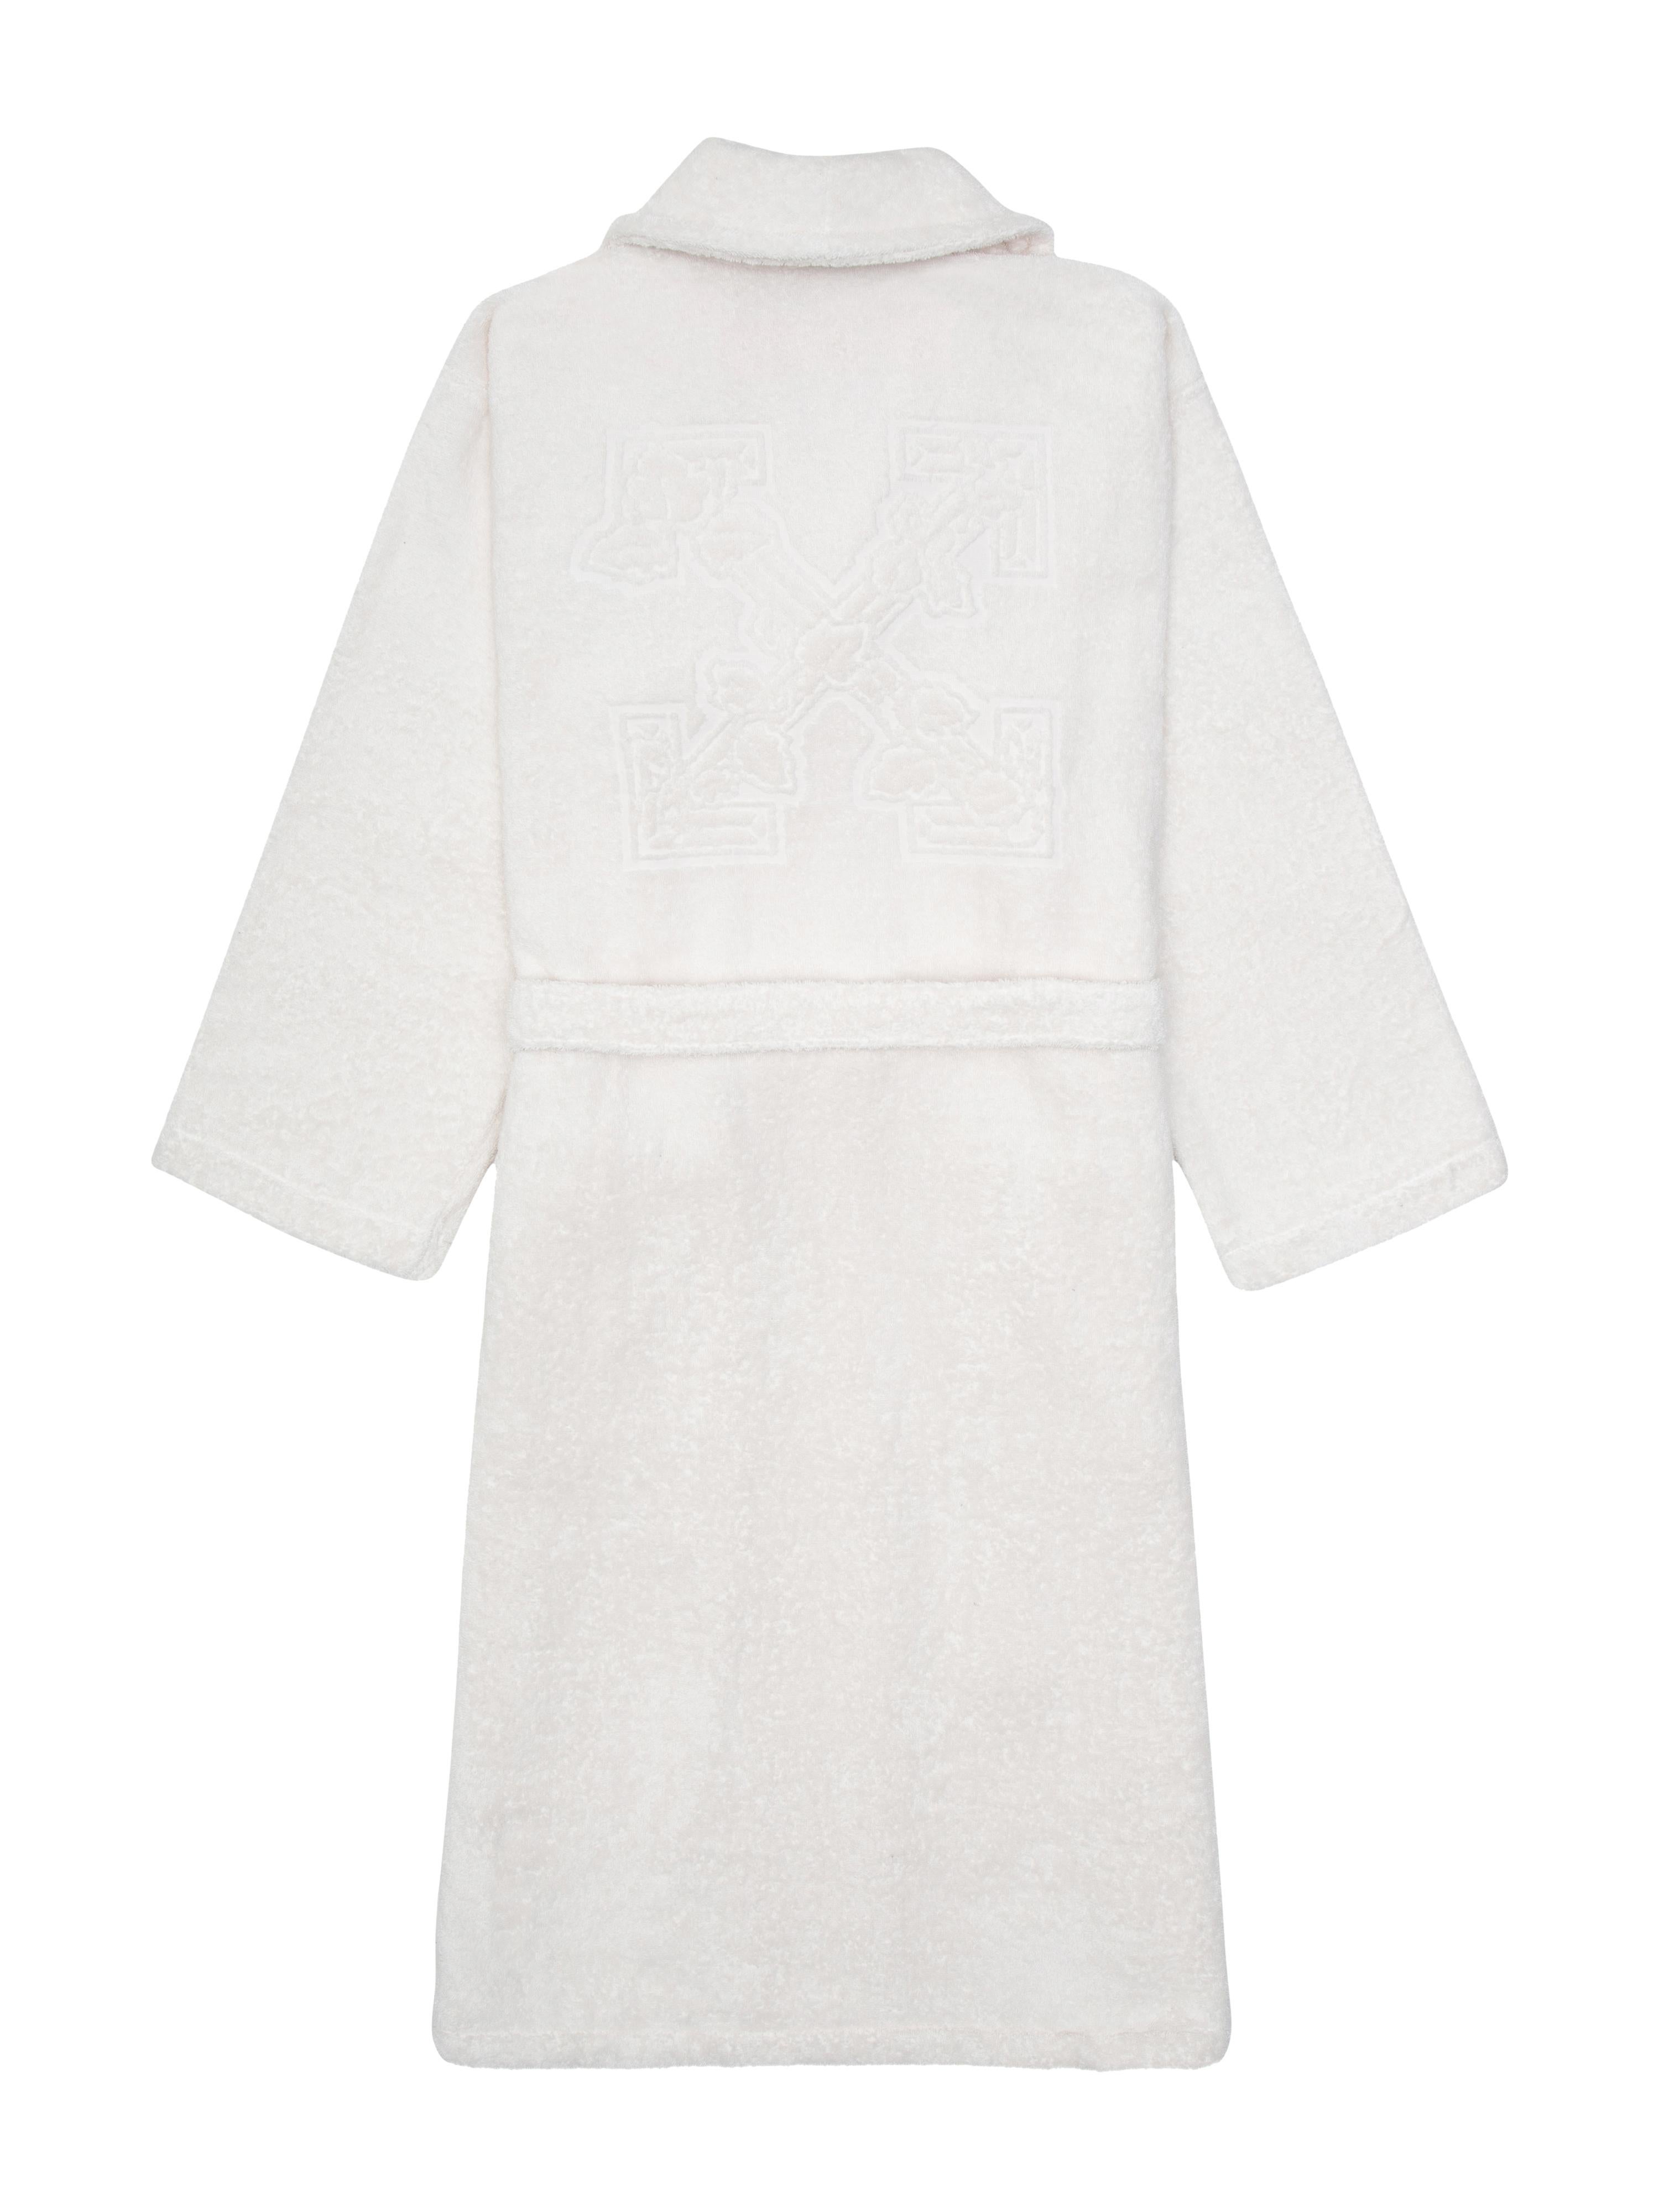 White bathrobe with jacquard leaves arrows on the back. Off-hand logo embroiedered on chest, and orange “HOME” label on the inside.
By Virgil Abloh
Dimensions: 65 W x 135 H
This item is only available to be purchased and shipped to the United